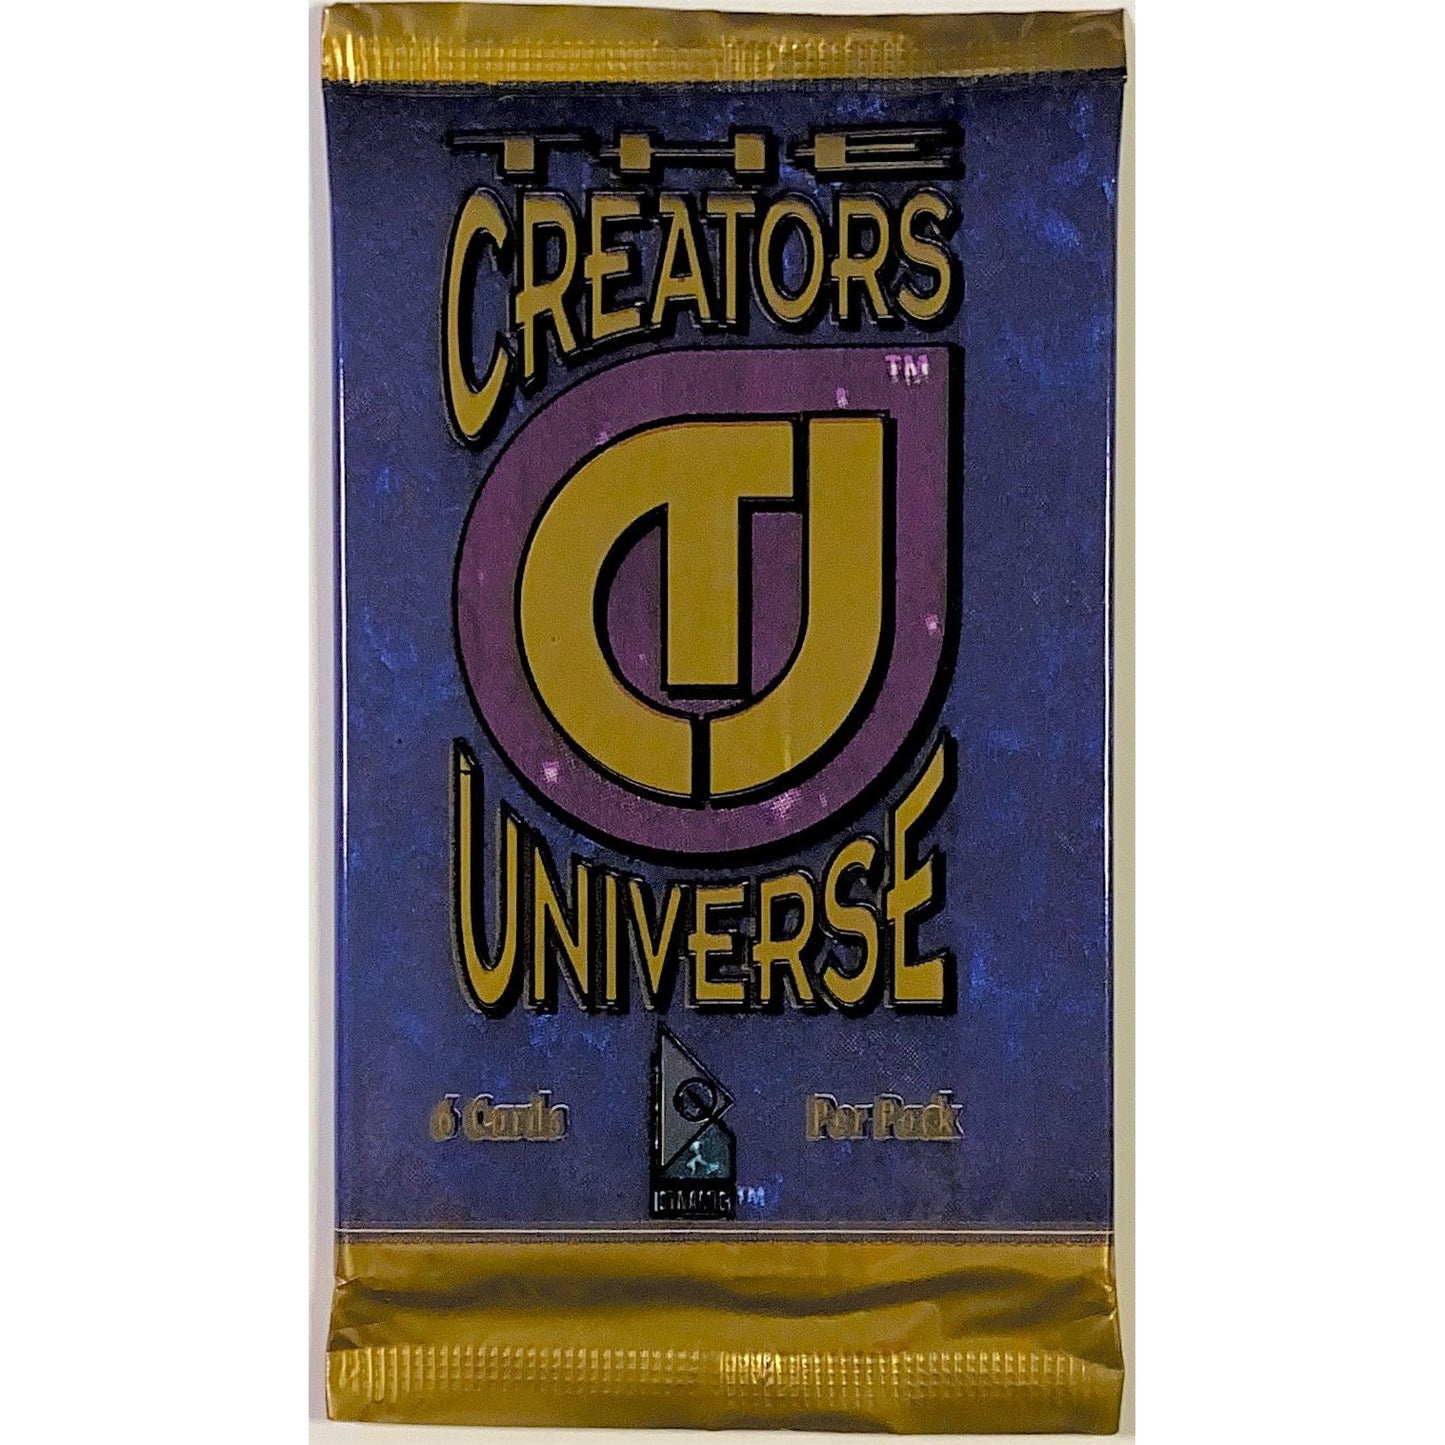  1993 Dynamic The Creators Universe Pack  Local Legends Cards & Collectibles